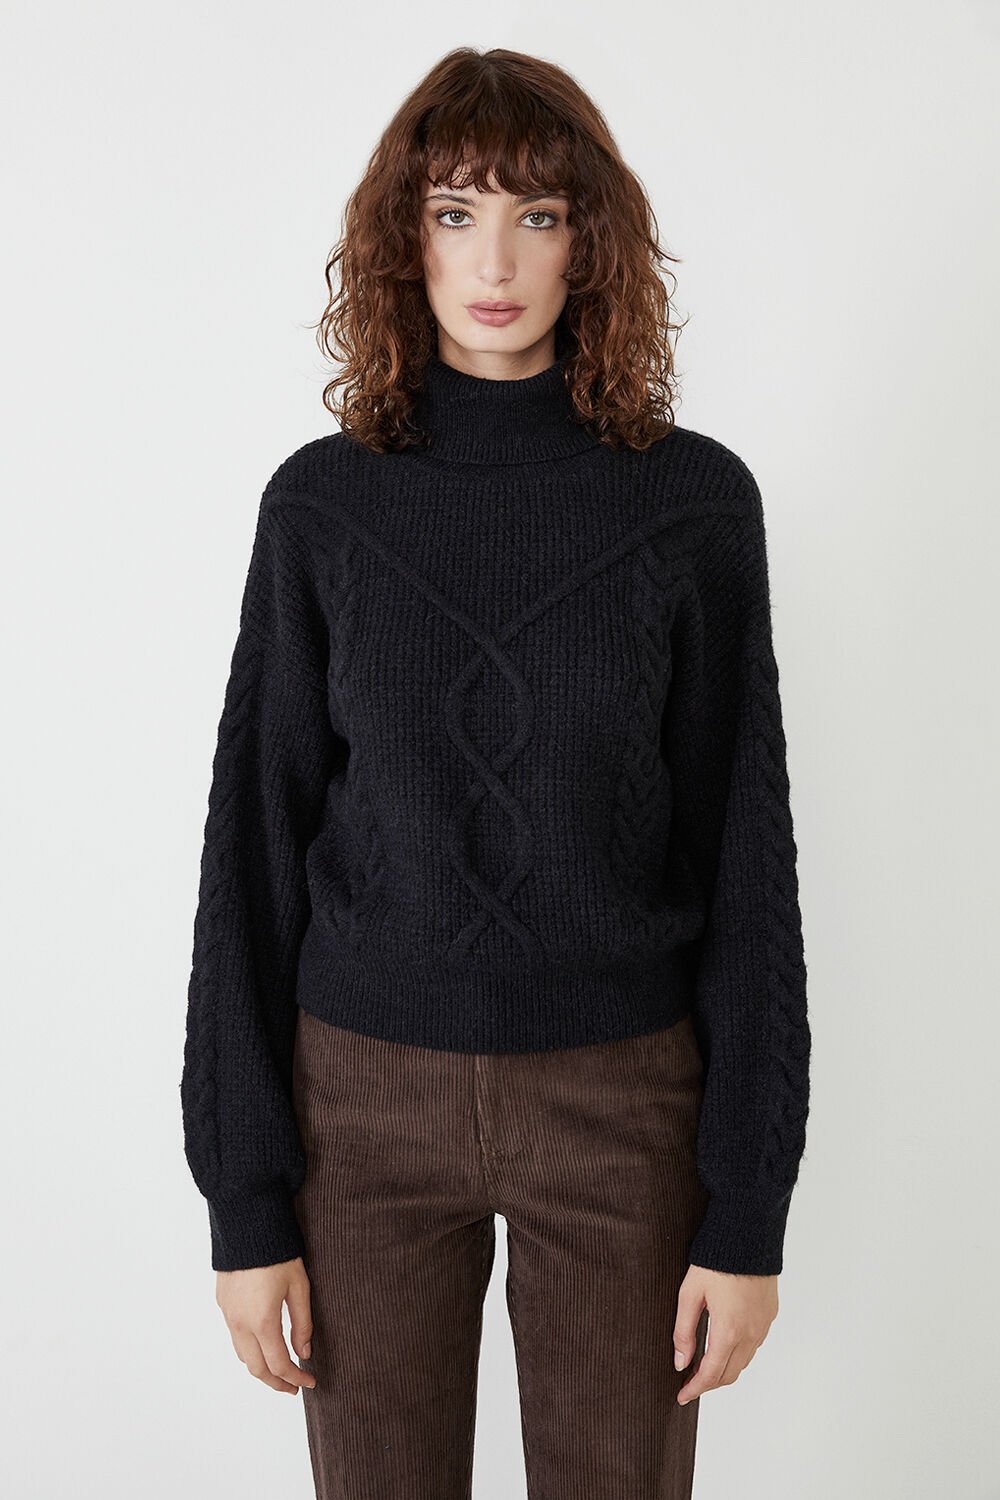 MAYA CABLE KNIT  in colour CAVIAR